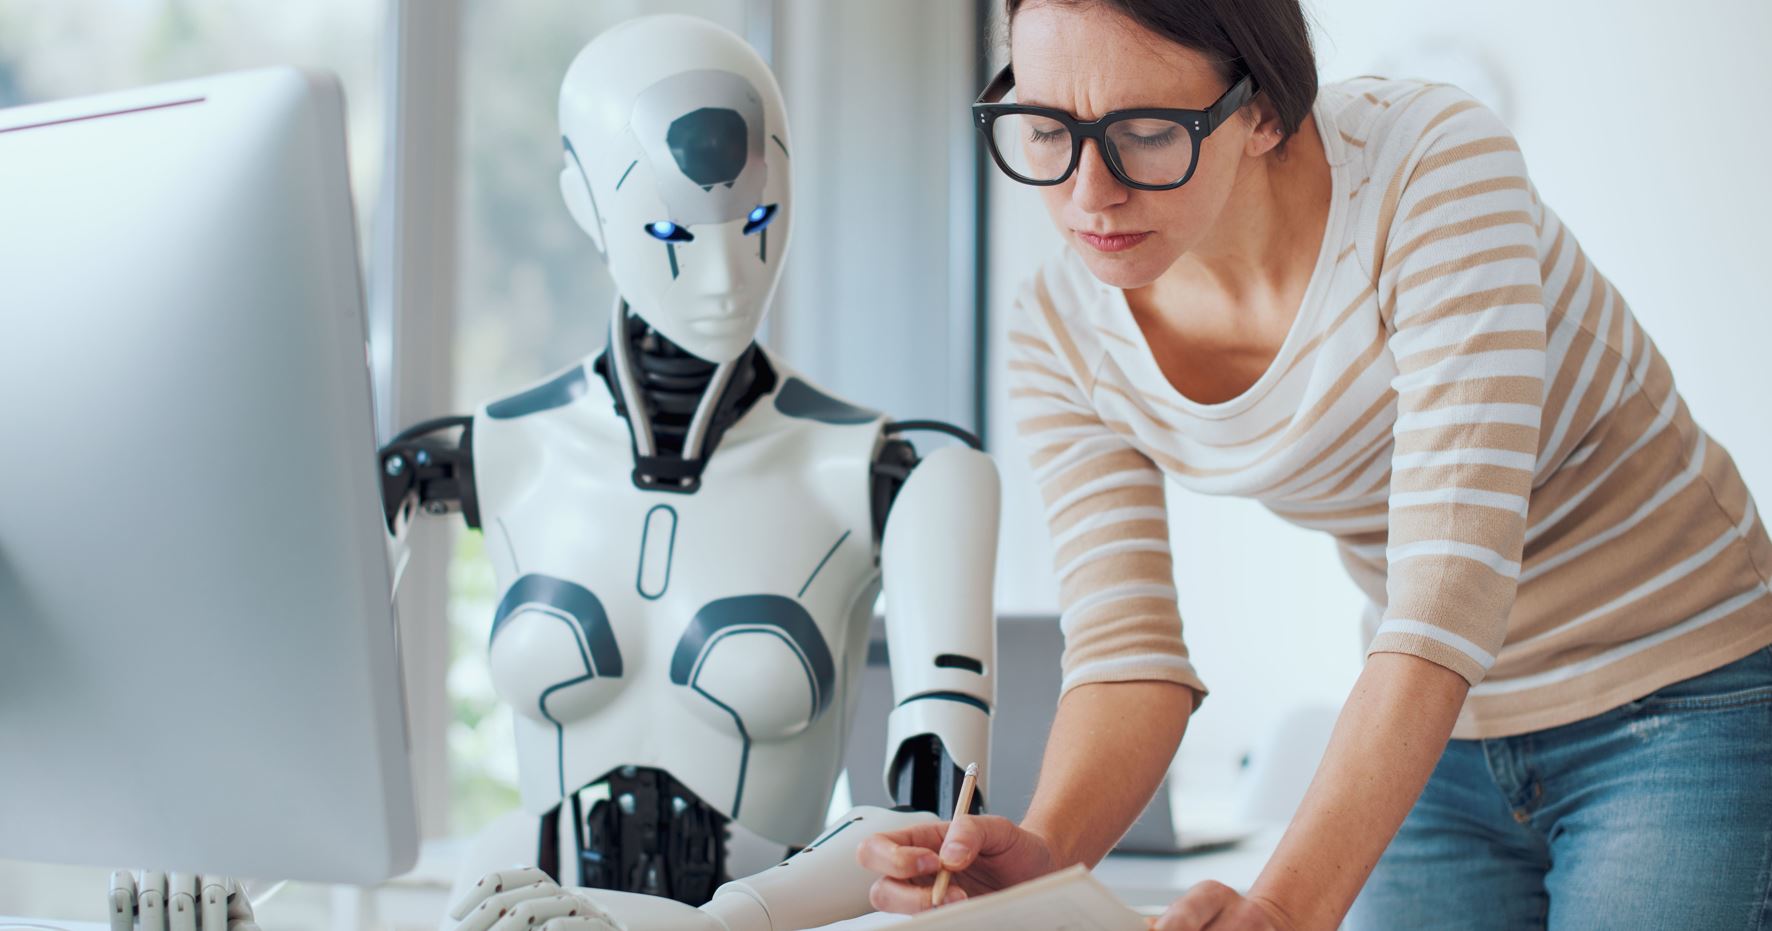 Human and Robot Working Together